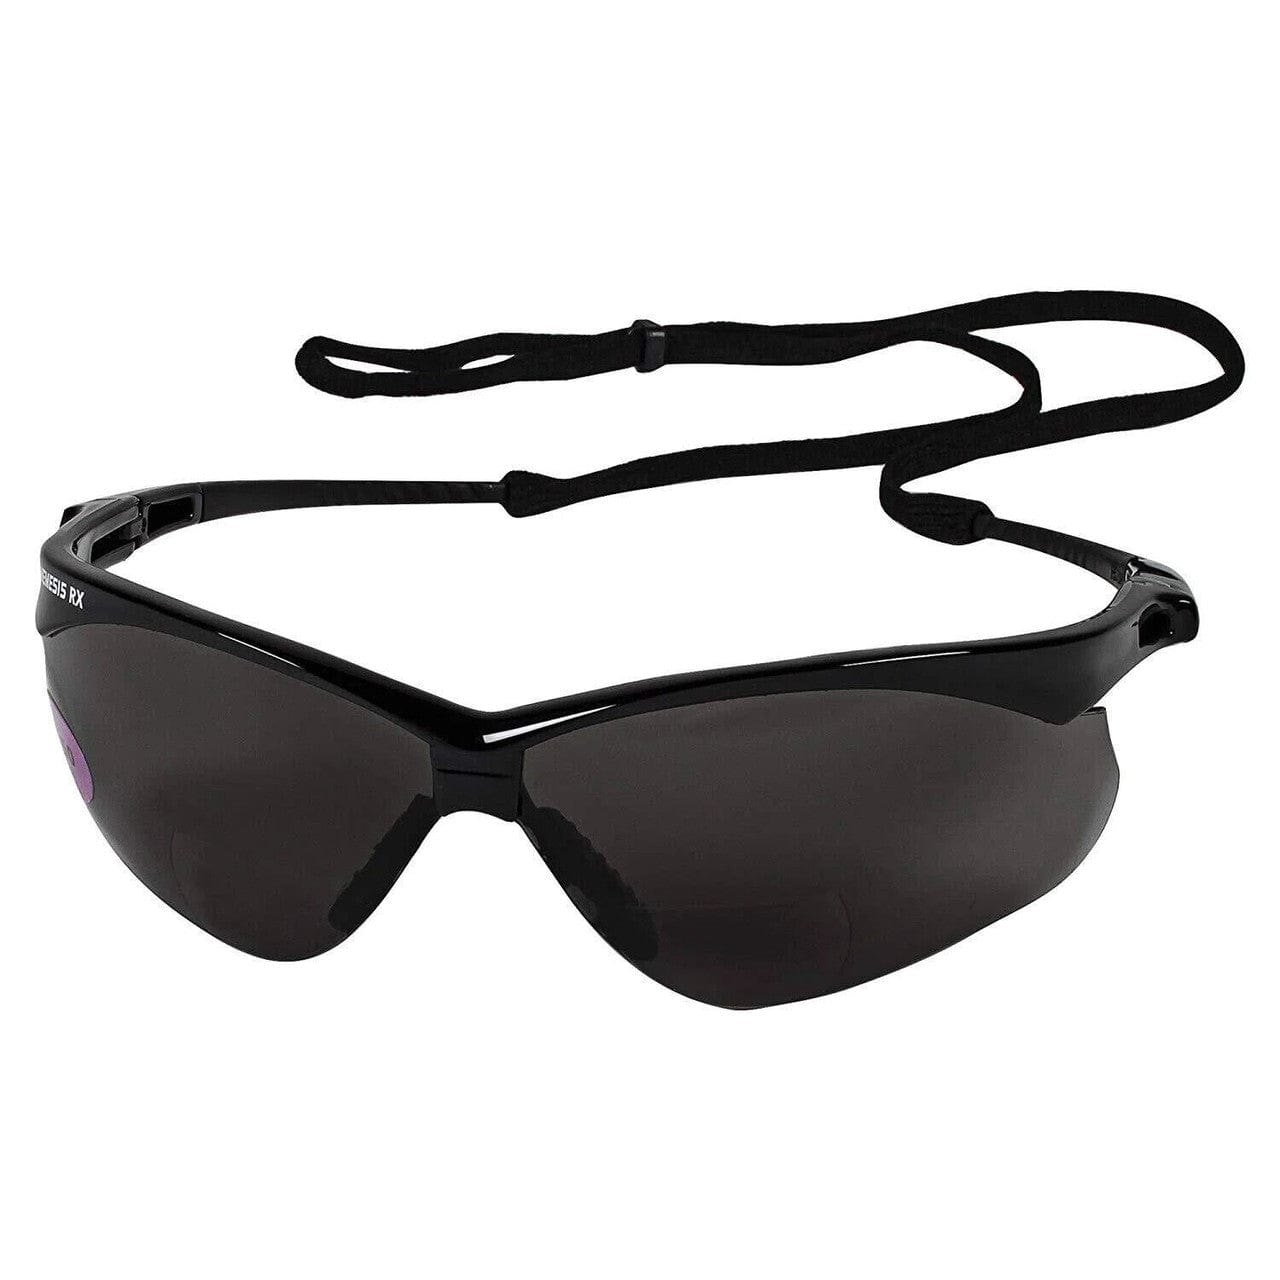 KleenGuard Nemesis Rx Readers with Smoke Lens Front View